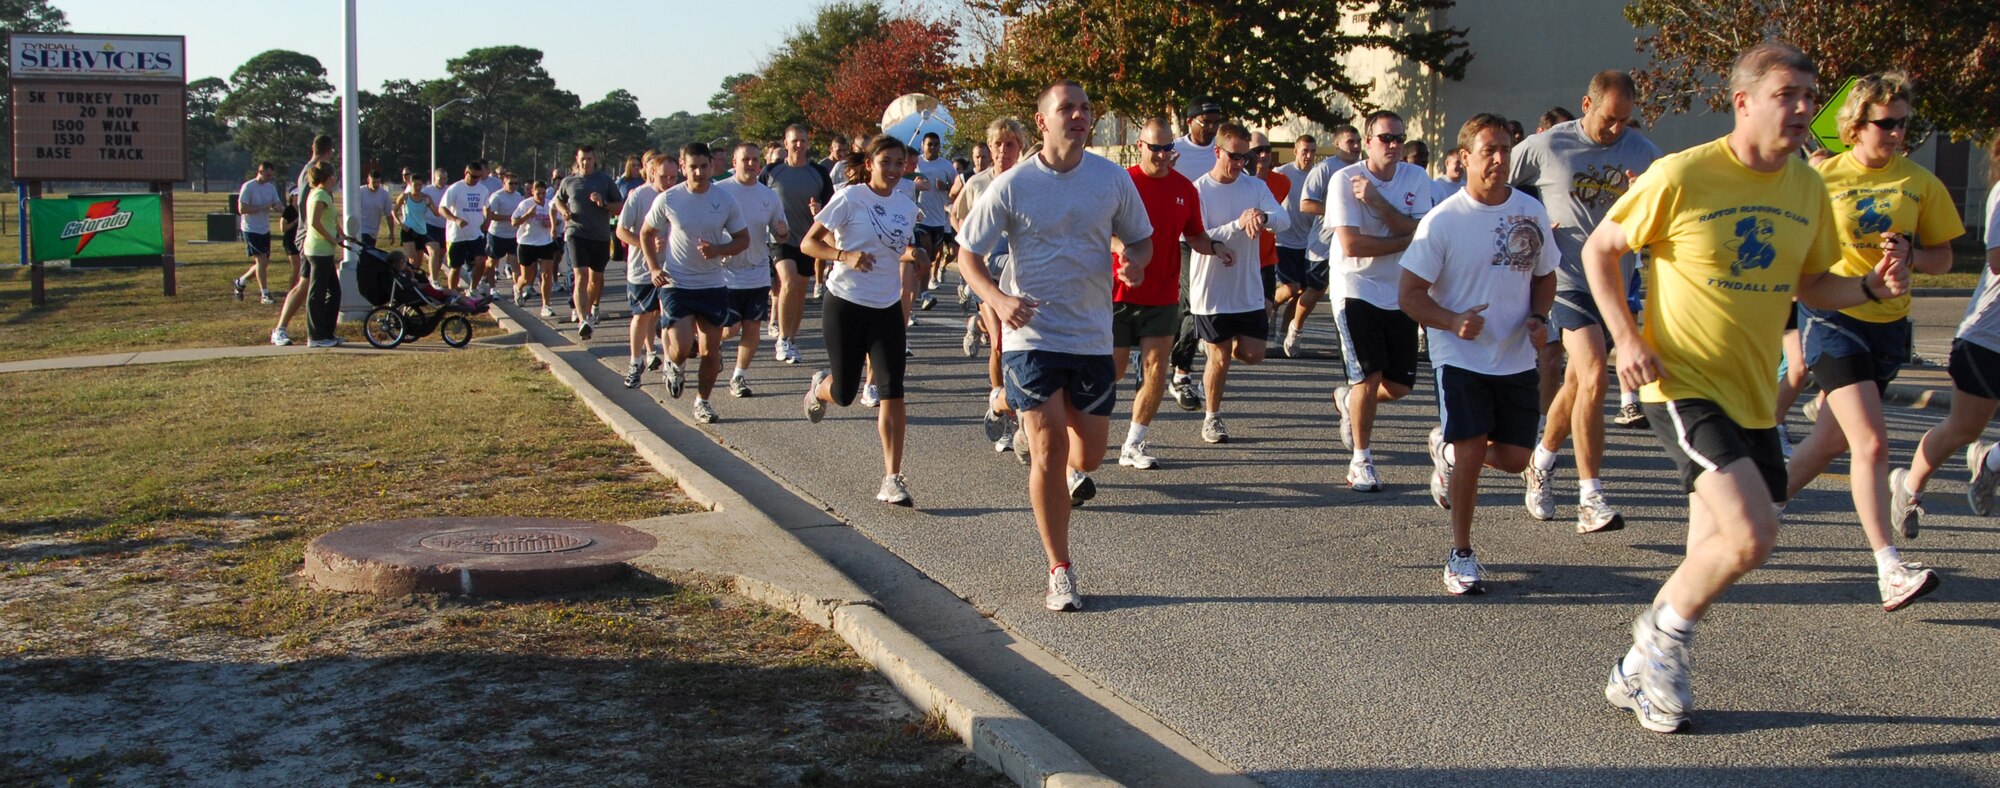 Team Tyndall members participated in Tyndall's 15th annual Turkey Trot 5k Walk/Run Thursday at the Fitness Center.  More than 100 participants showed up for the run.  (U.S. Air Force photo by Lisa Norman)